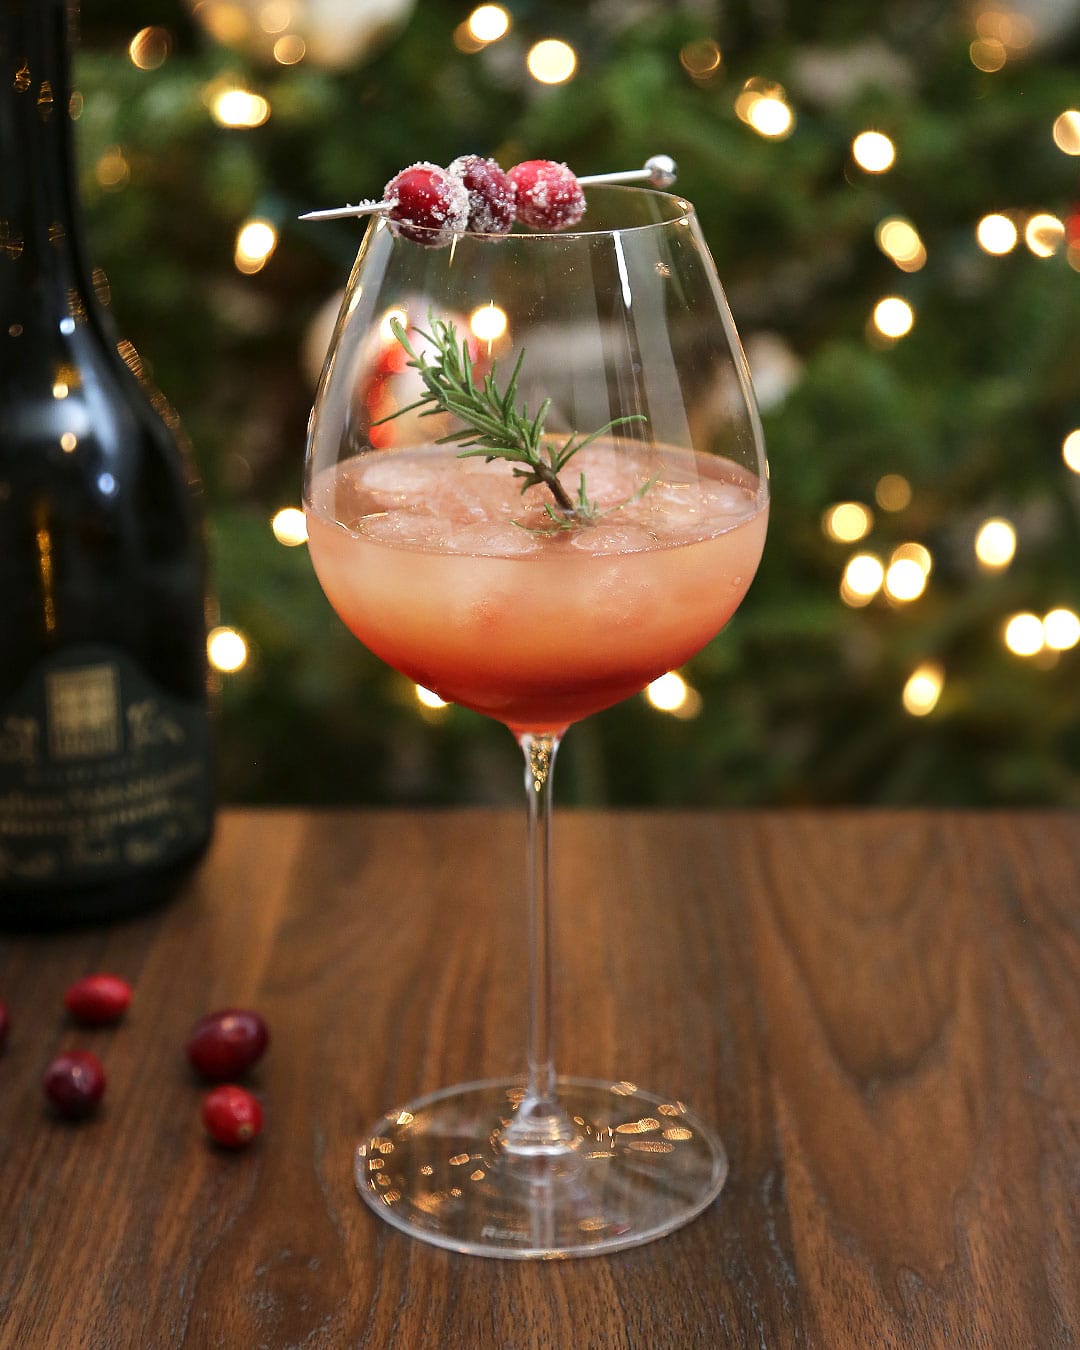 Spiced Cranberry Pear Spritz in wine glass with sugared cranberries and rosemary sprig in front of christmas tree